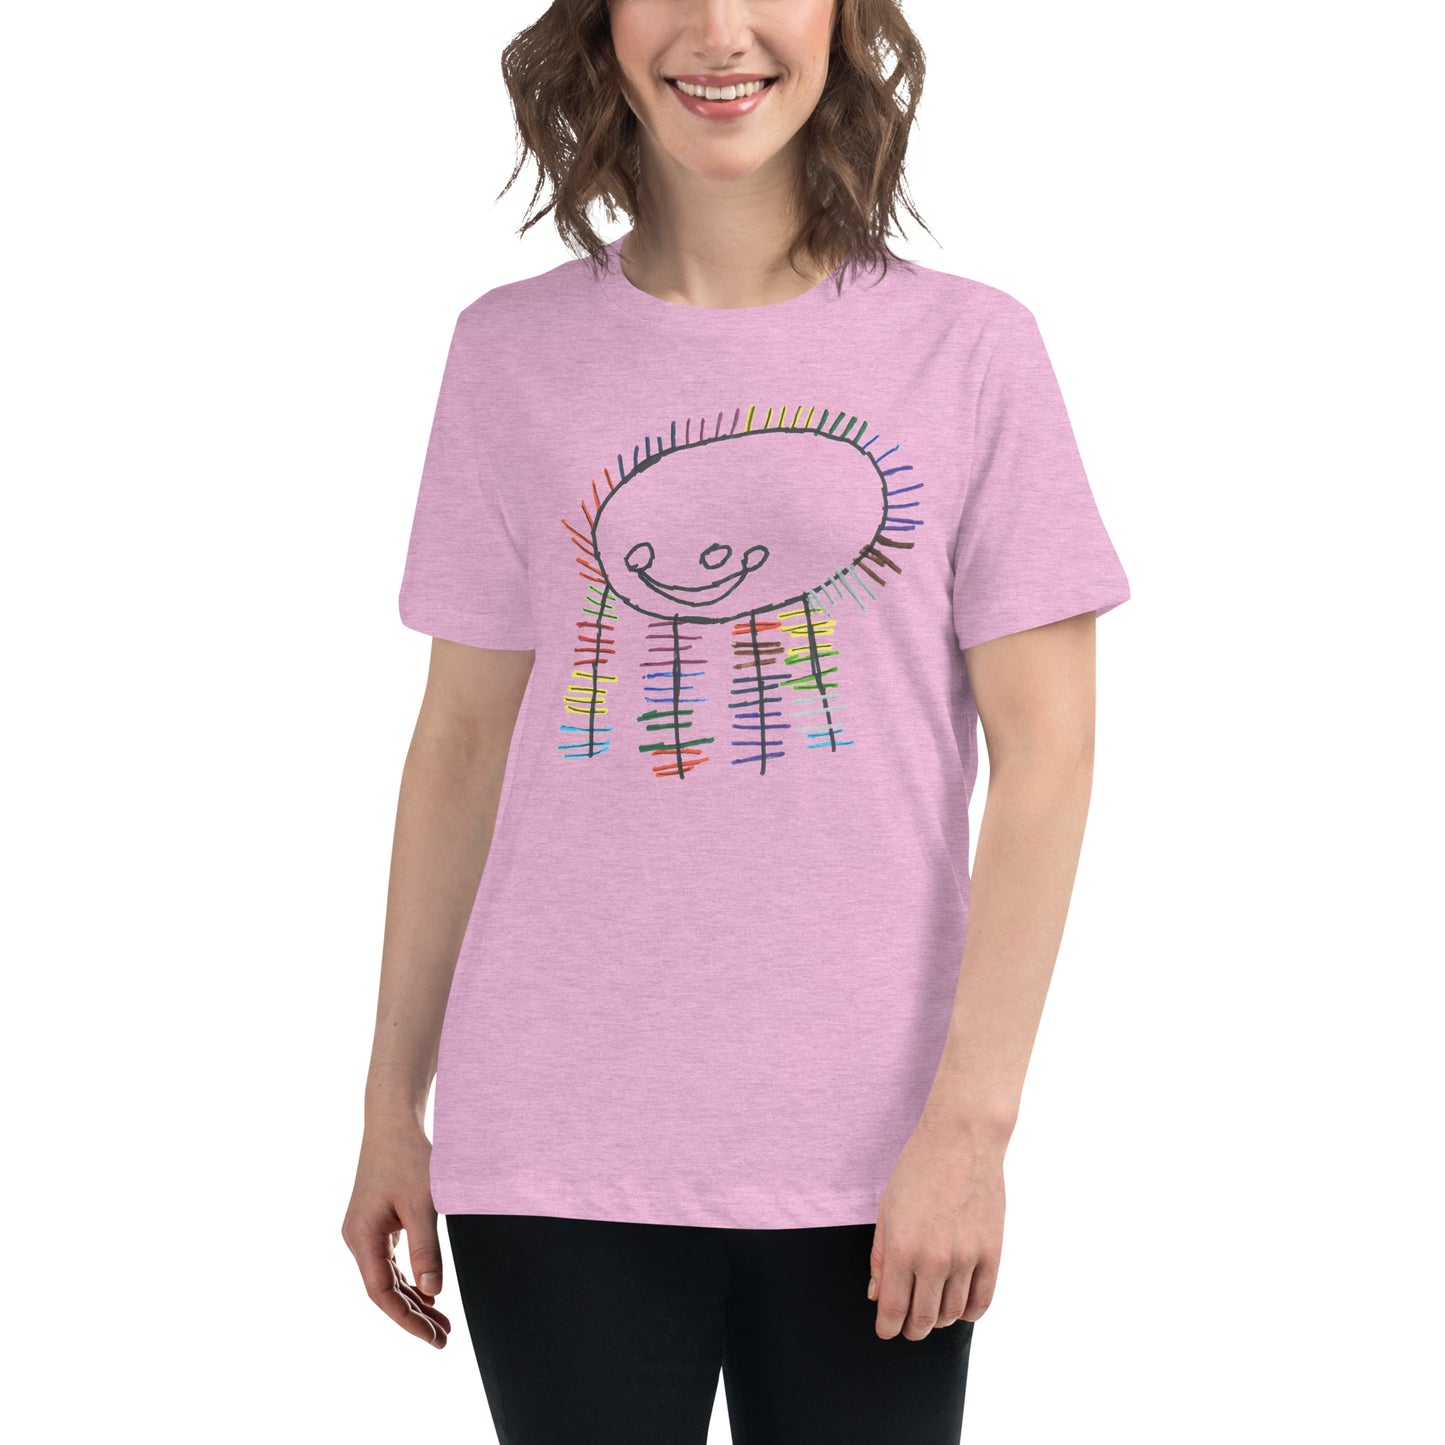 Women's Tee - "Me and My Markers"